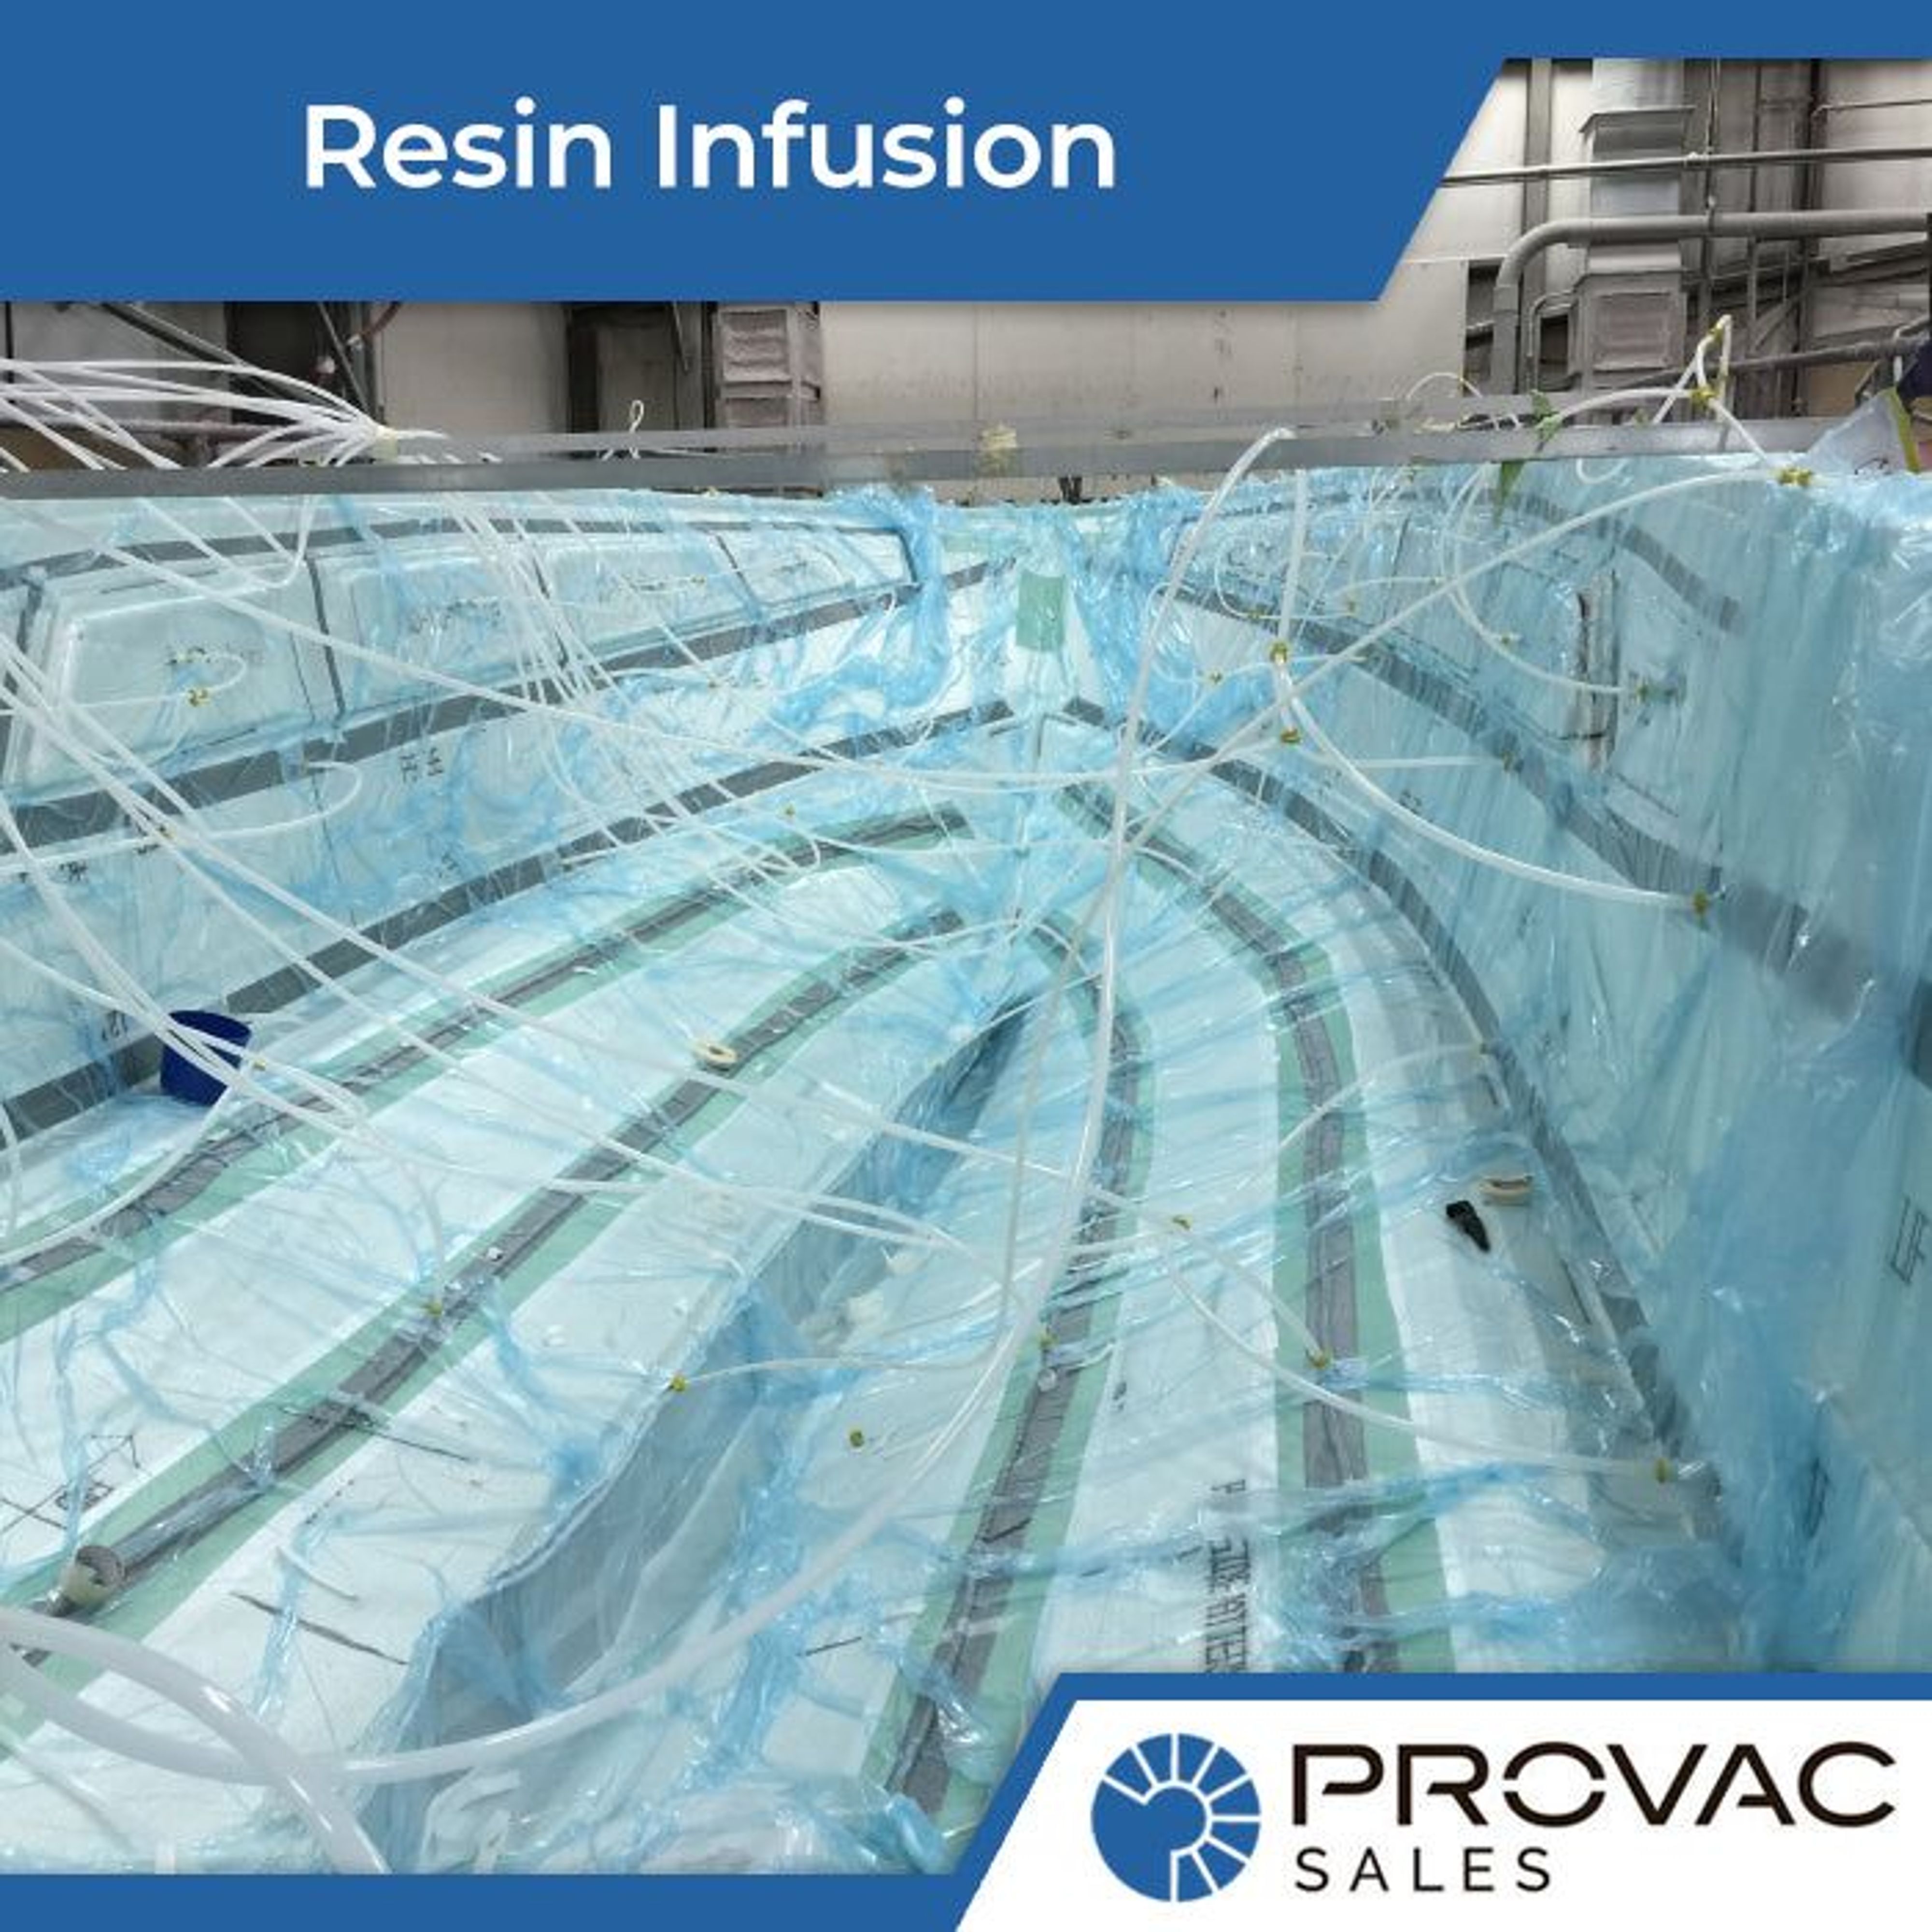 Vacuum Pumps for Resin Infusion [Info Guide]